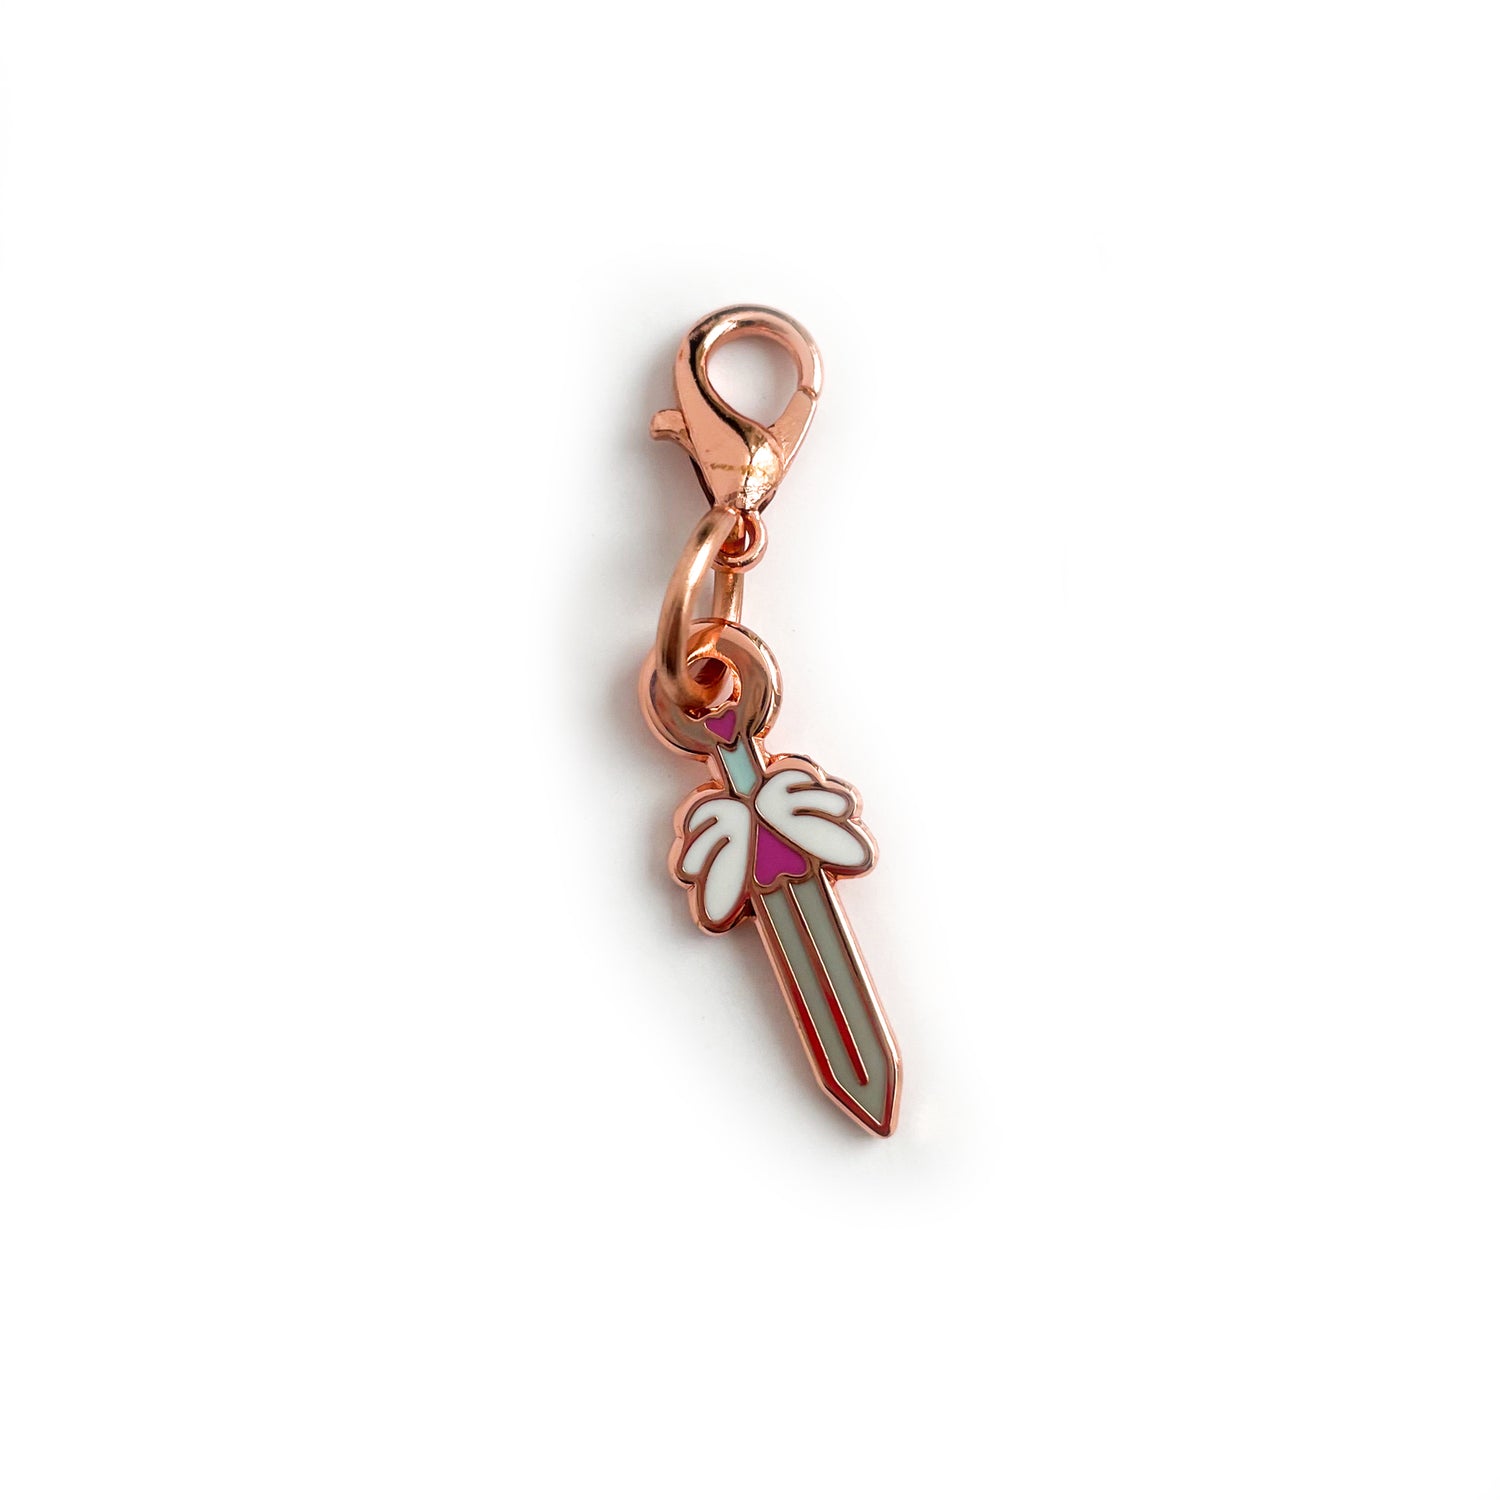 A charm with a lobster claw clasp in rose gold metal. The charm is shaped like a sword with heart and winged hilt.